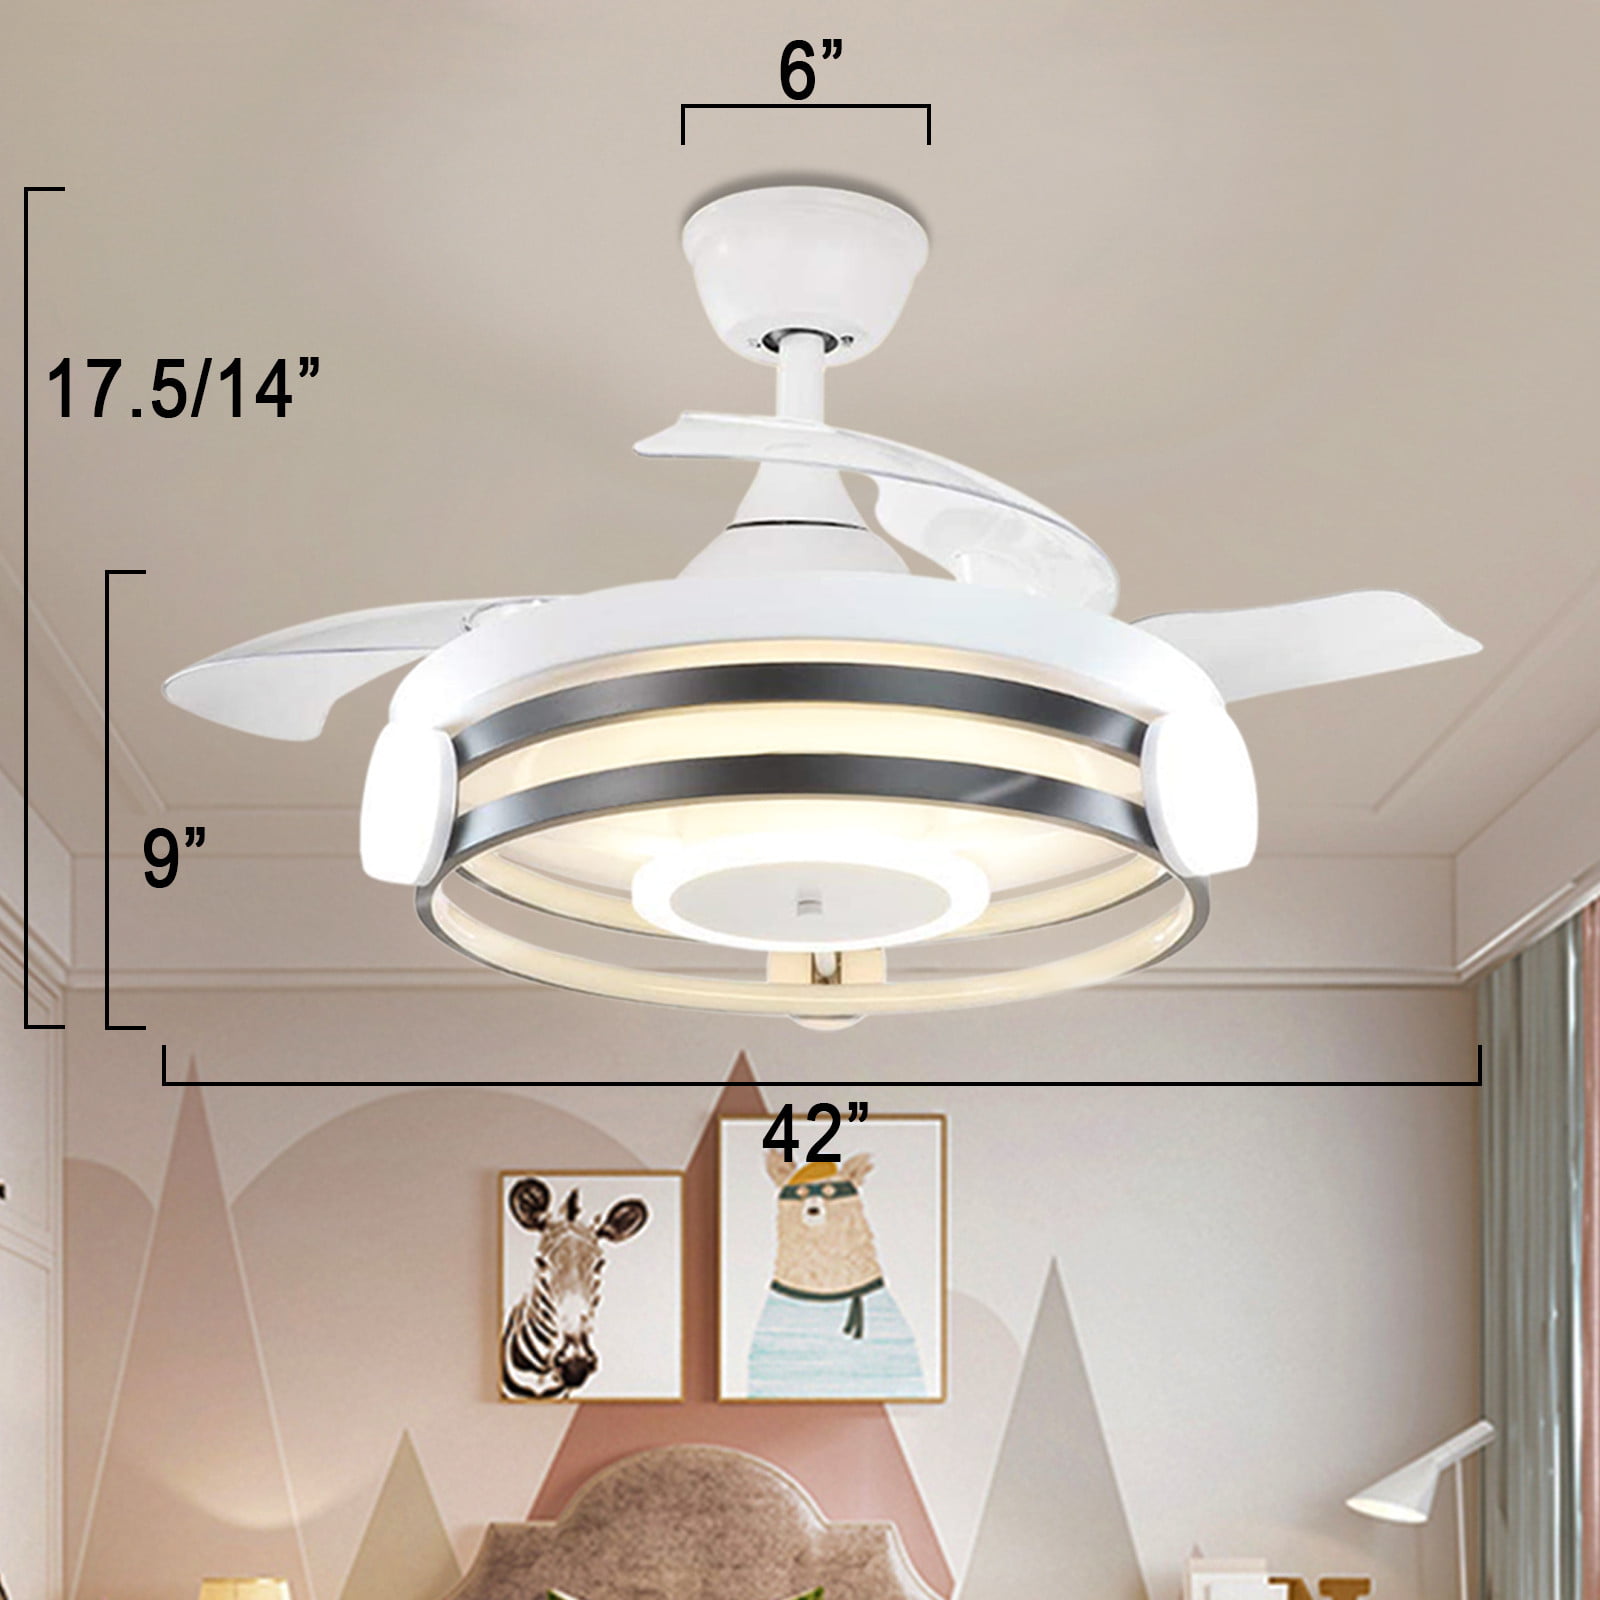 Details about   42" Invisible Fan Chandelier Light Lamp LED Fan Ceiling Remote Control Modern 